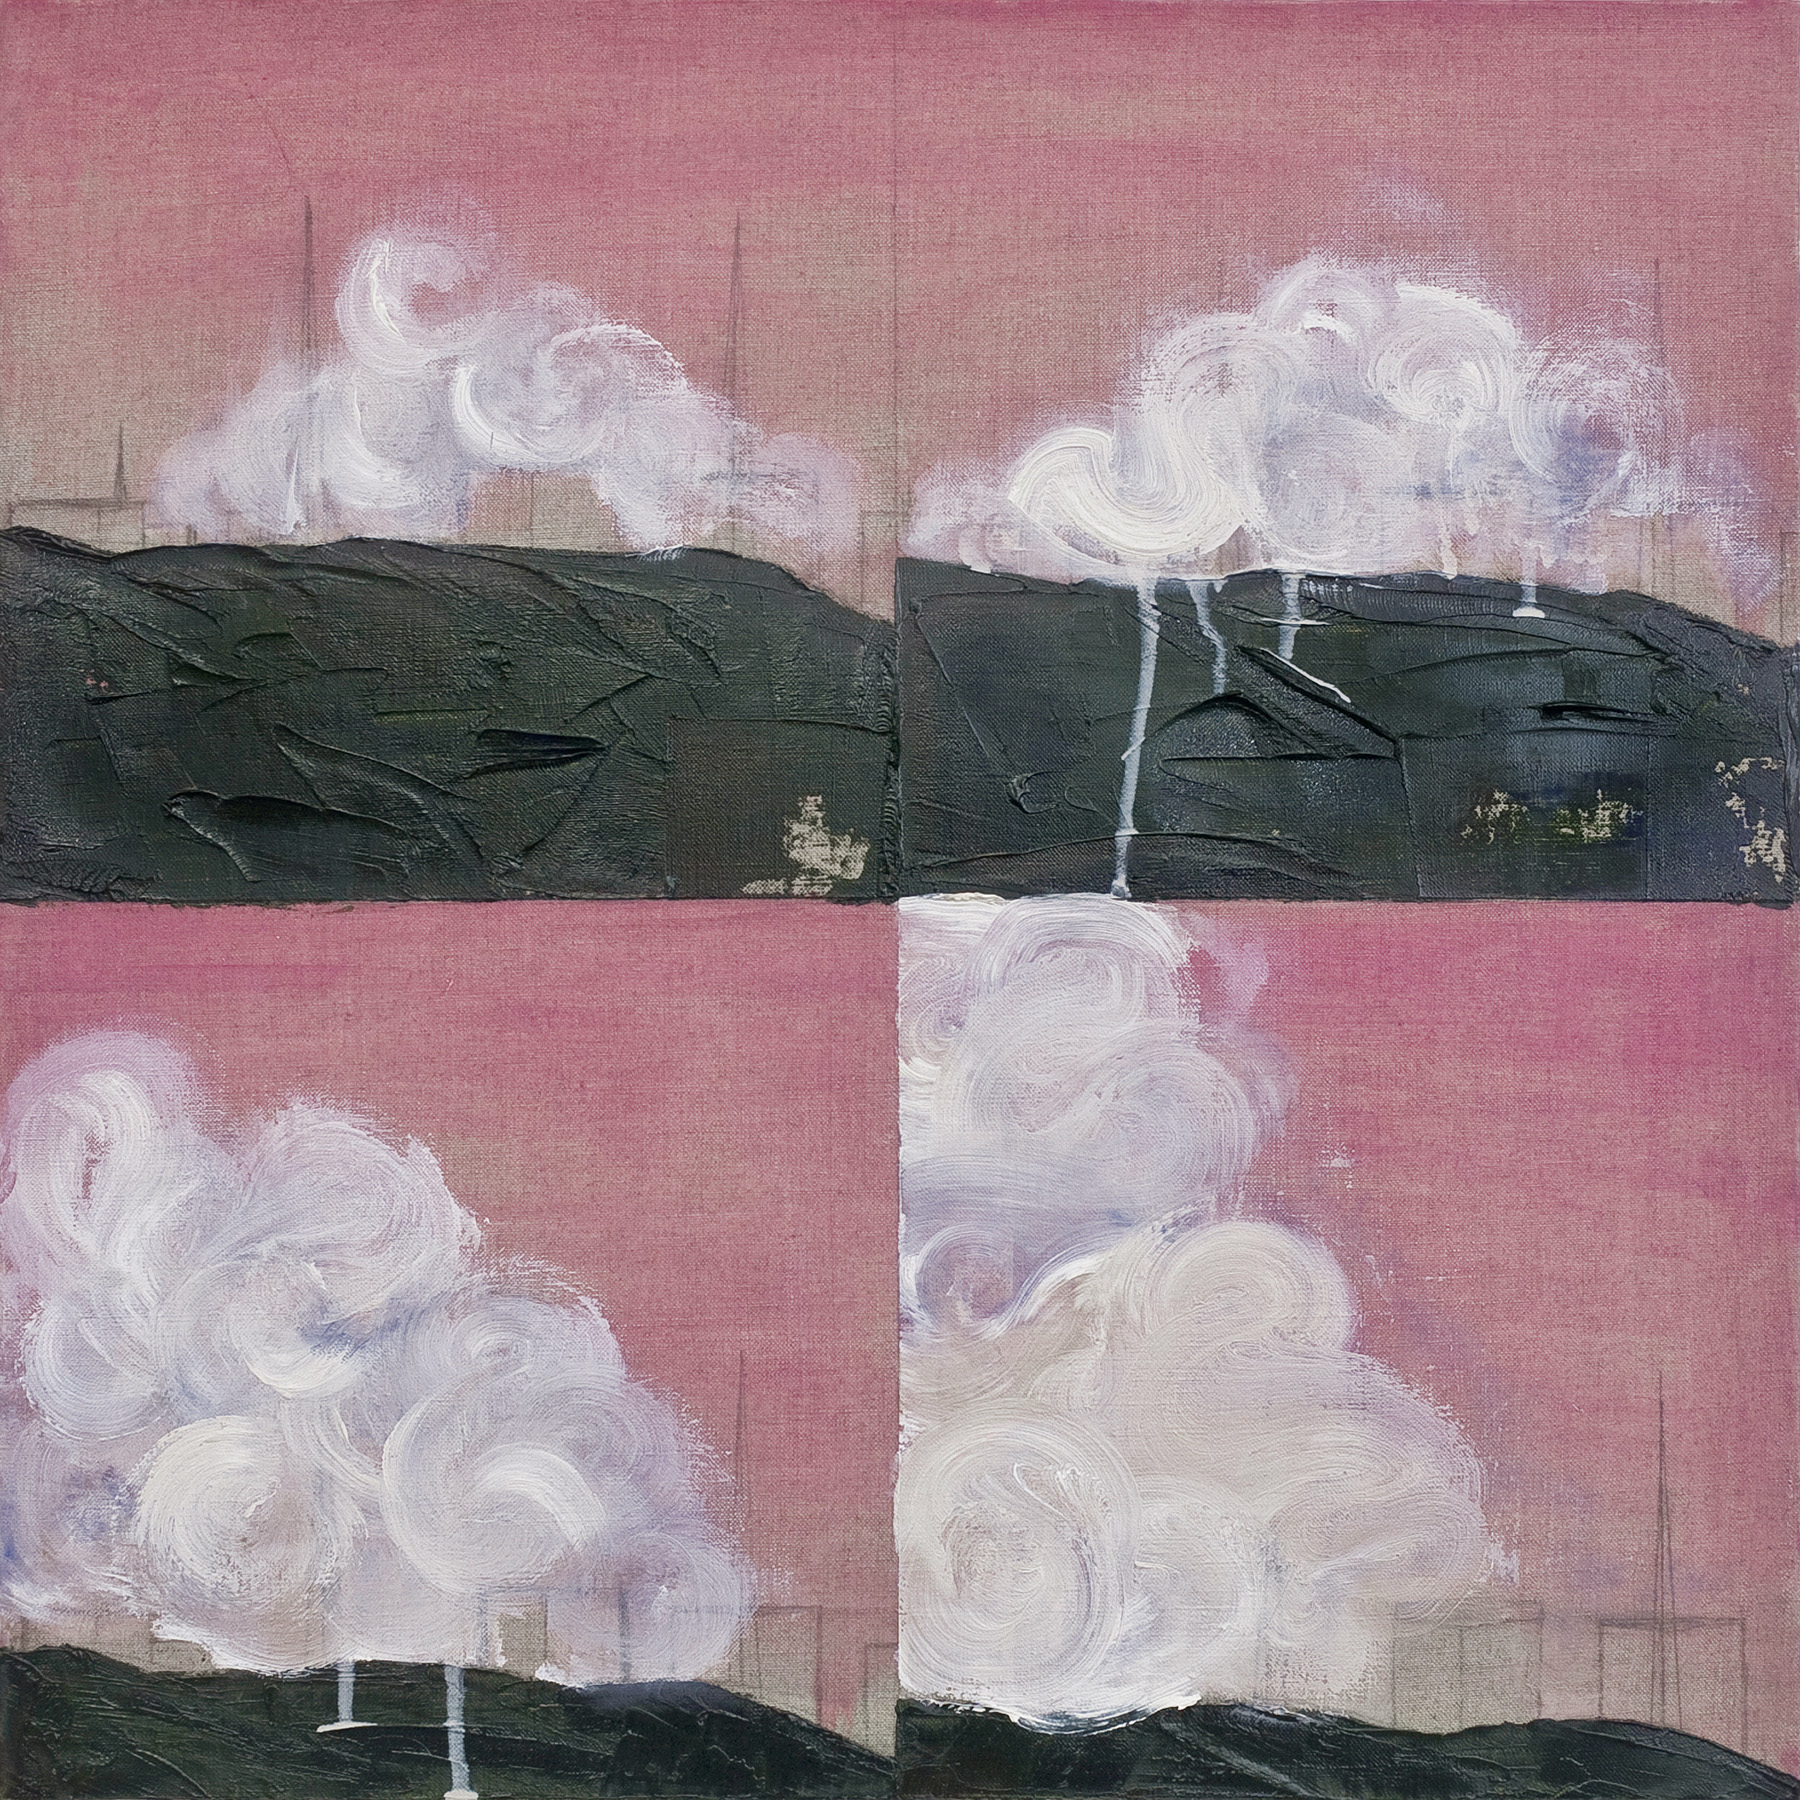    How to Paint Clouds (Step 1, 2, 3, 4) , oil and pencil on linen, 51 x 51 cm,&nbsp; 2012 